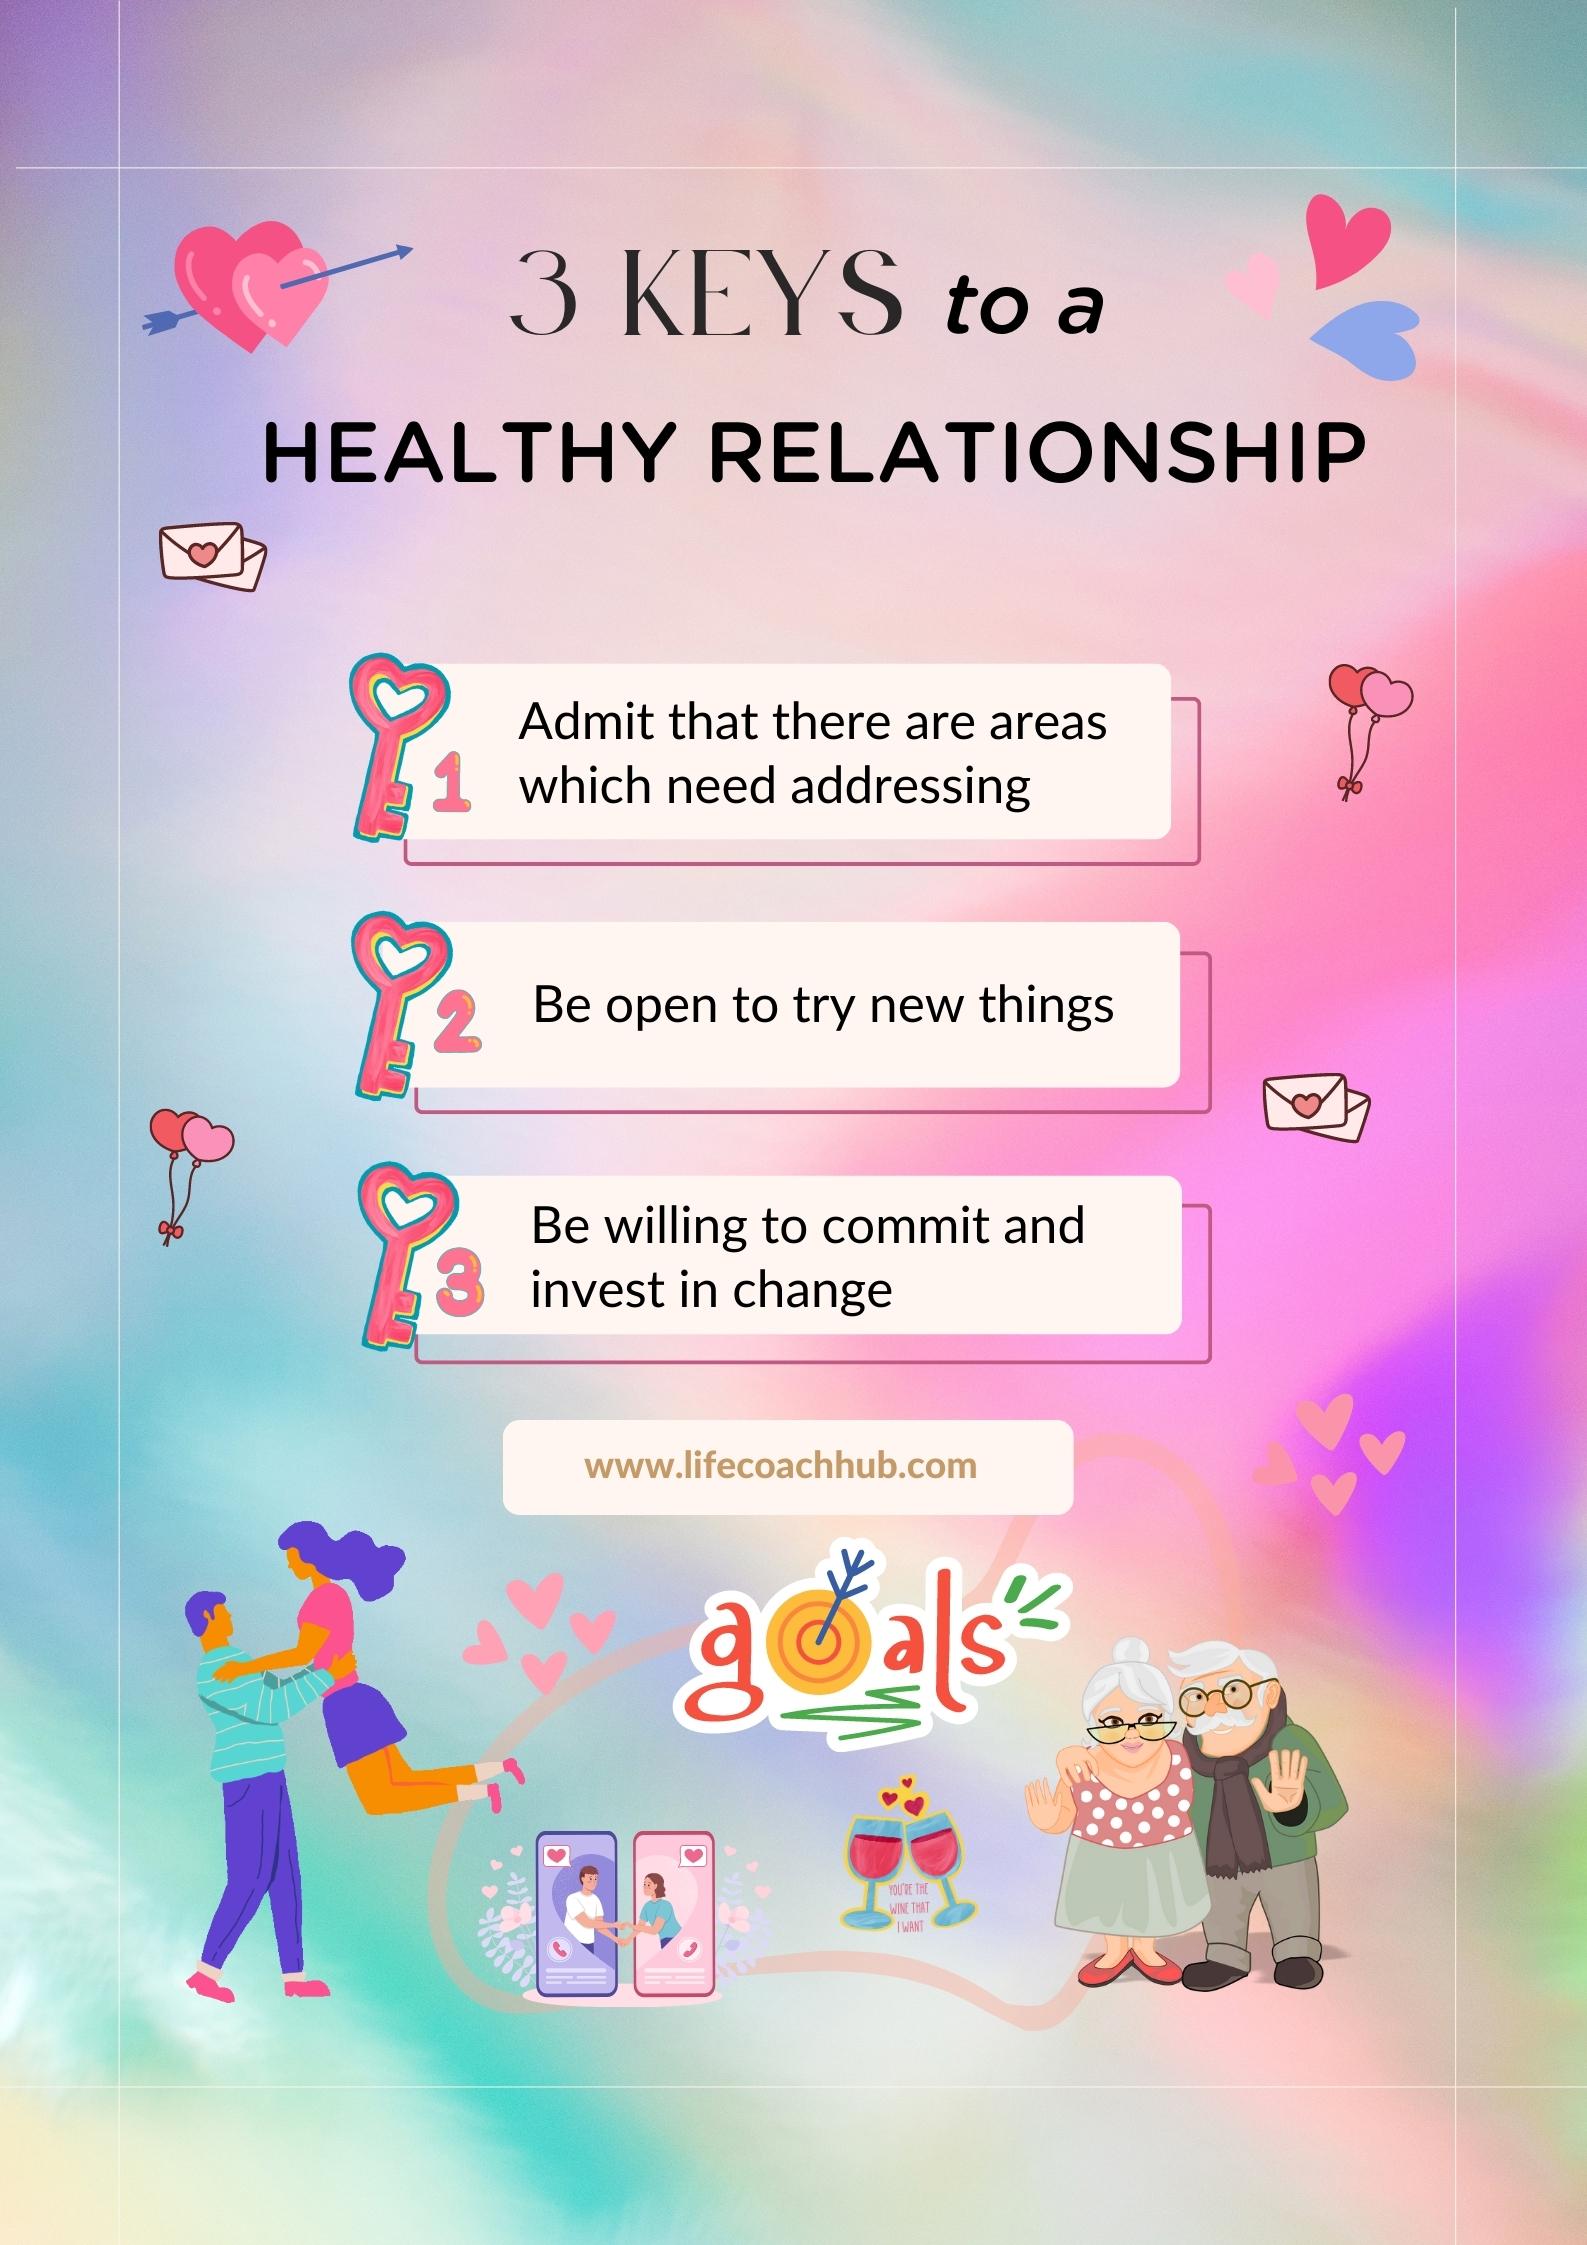 Keys to a healthy relationship tips